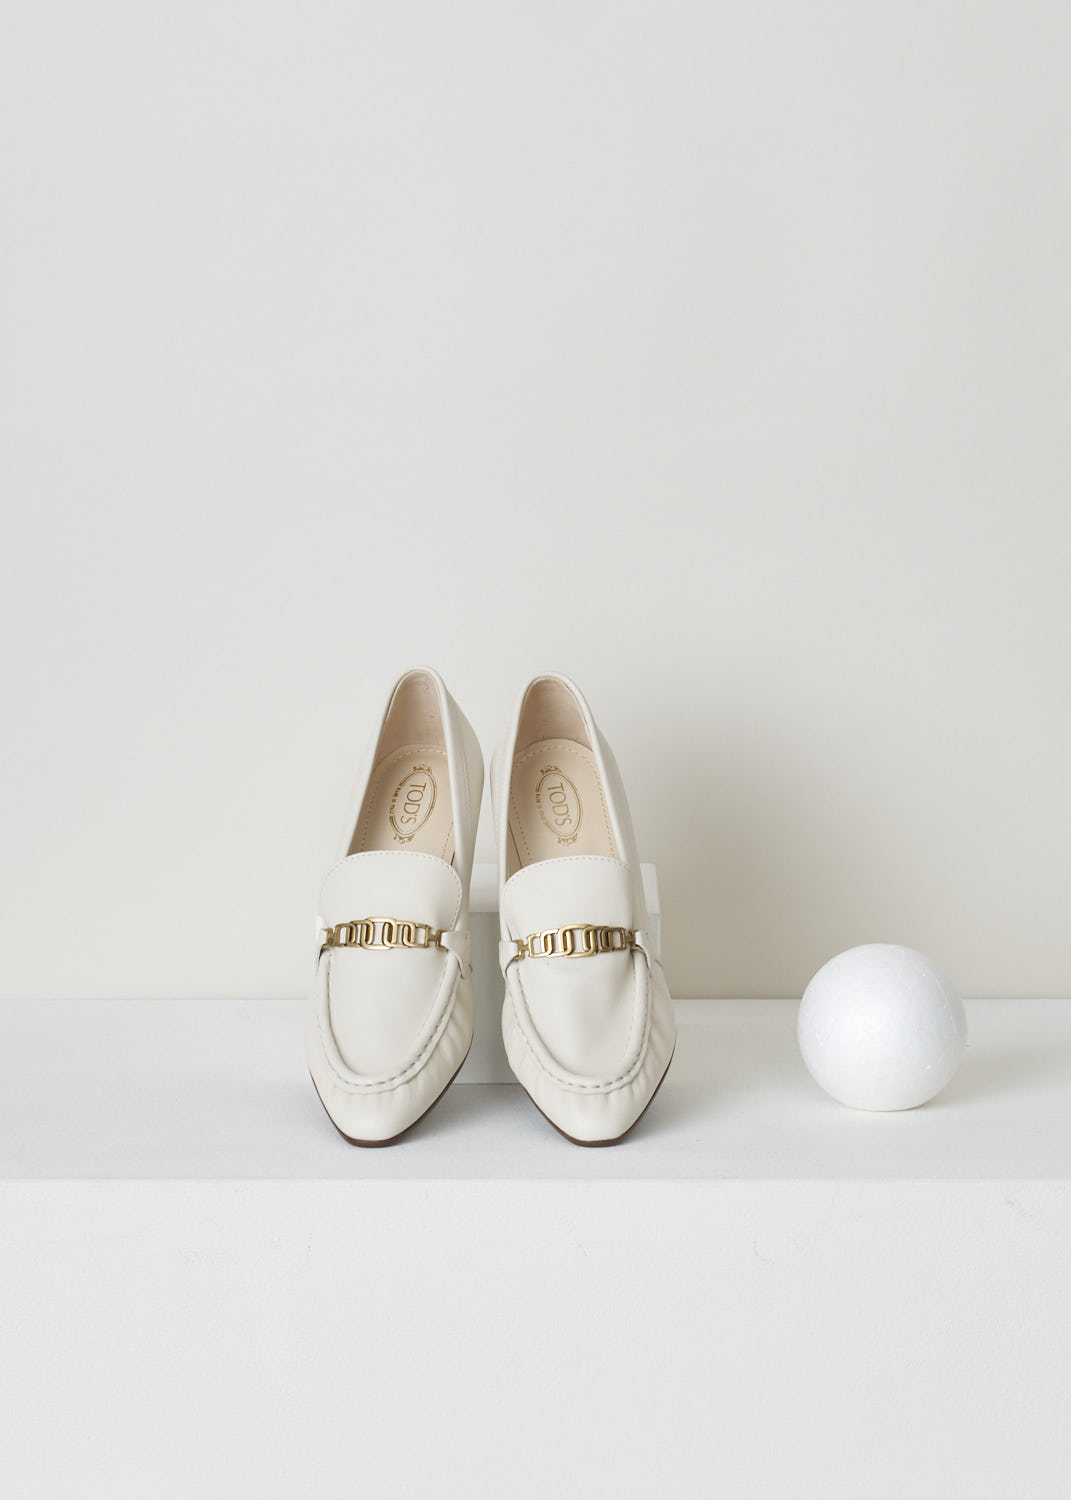 TODS, OFF-WHITE LEATHER LOAFERS WITH A TRAPEZOID HEEL, XXW09D0EC80_MID_B015, White, Top, Off-white leather loafers with a wooden trapezoid heel. This model has a pointed toe and a gold-toned buckle decorating the front. Around the trim, the leather is subtly pleated.


Heel height: 6 cm / 2.3 inch. 
